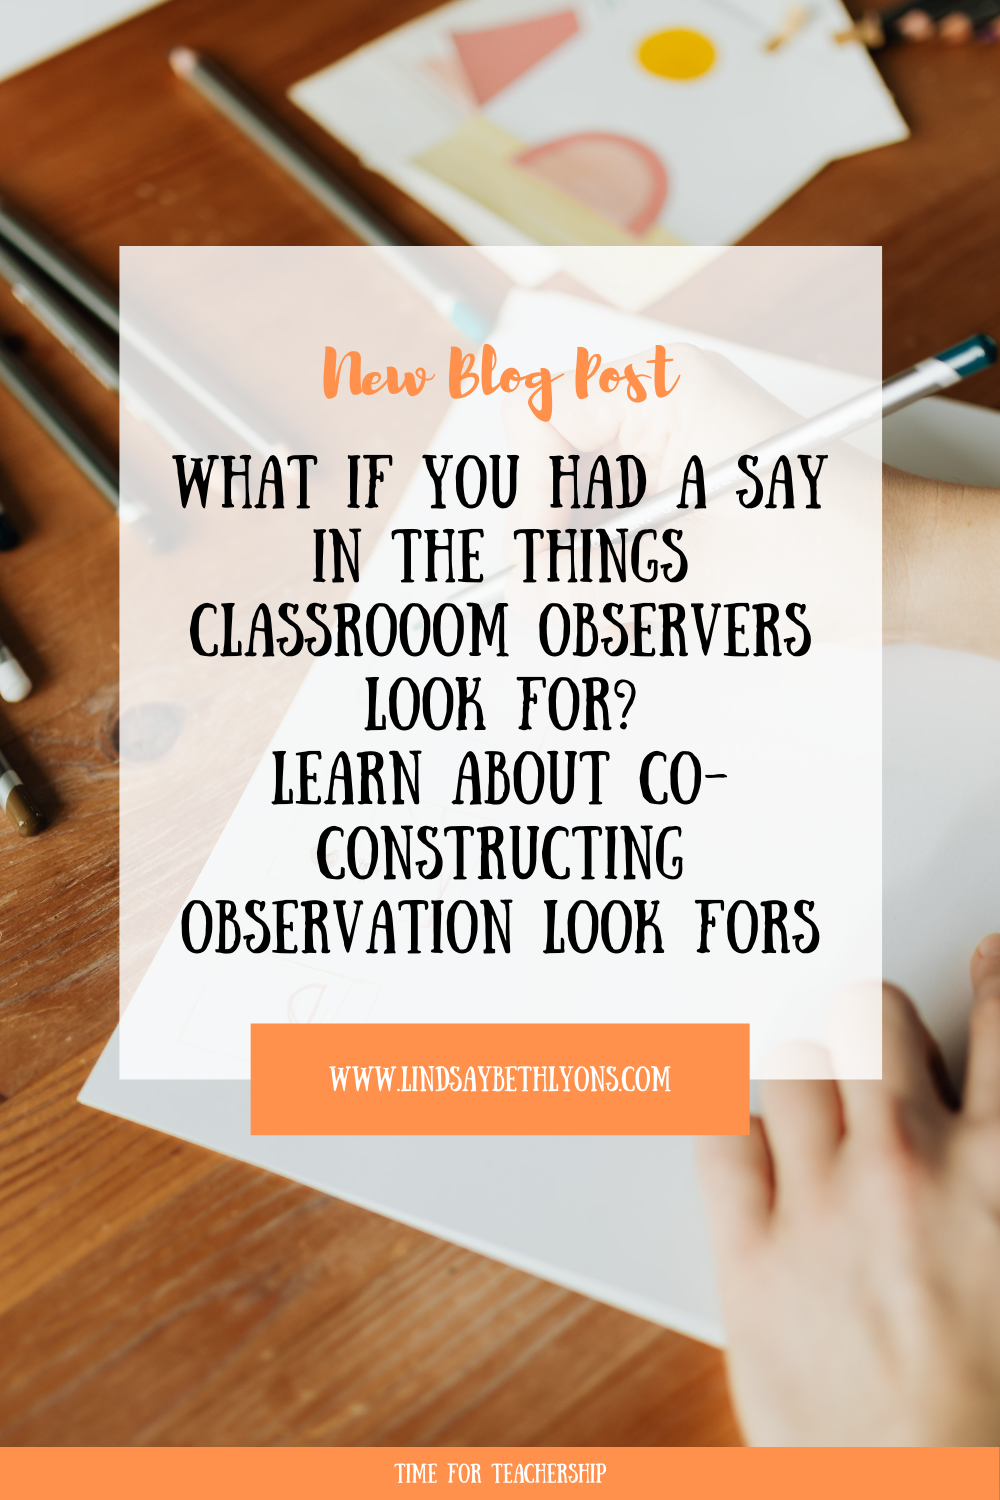 In this episode, we are talking about look fors, co-constructing them with teachers, and how you can make them clear for your students. Read the Time for Teachership blog post for more. For more educational equity & teacher tips, sign up for weekly emails at bit.ly/lindsayletter